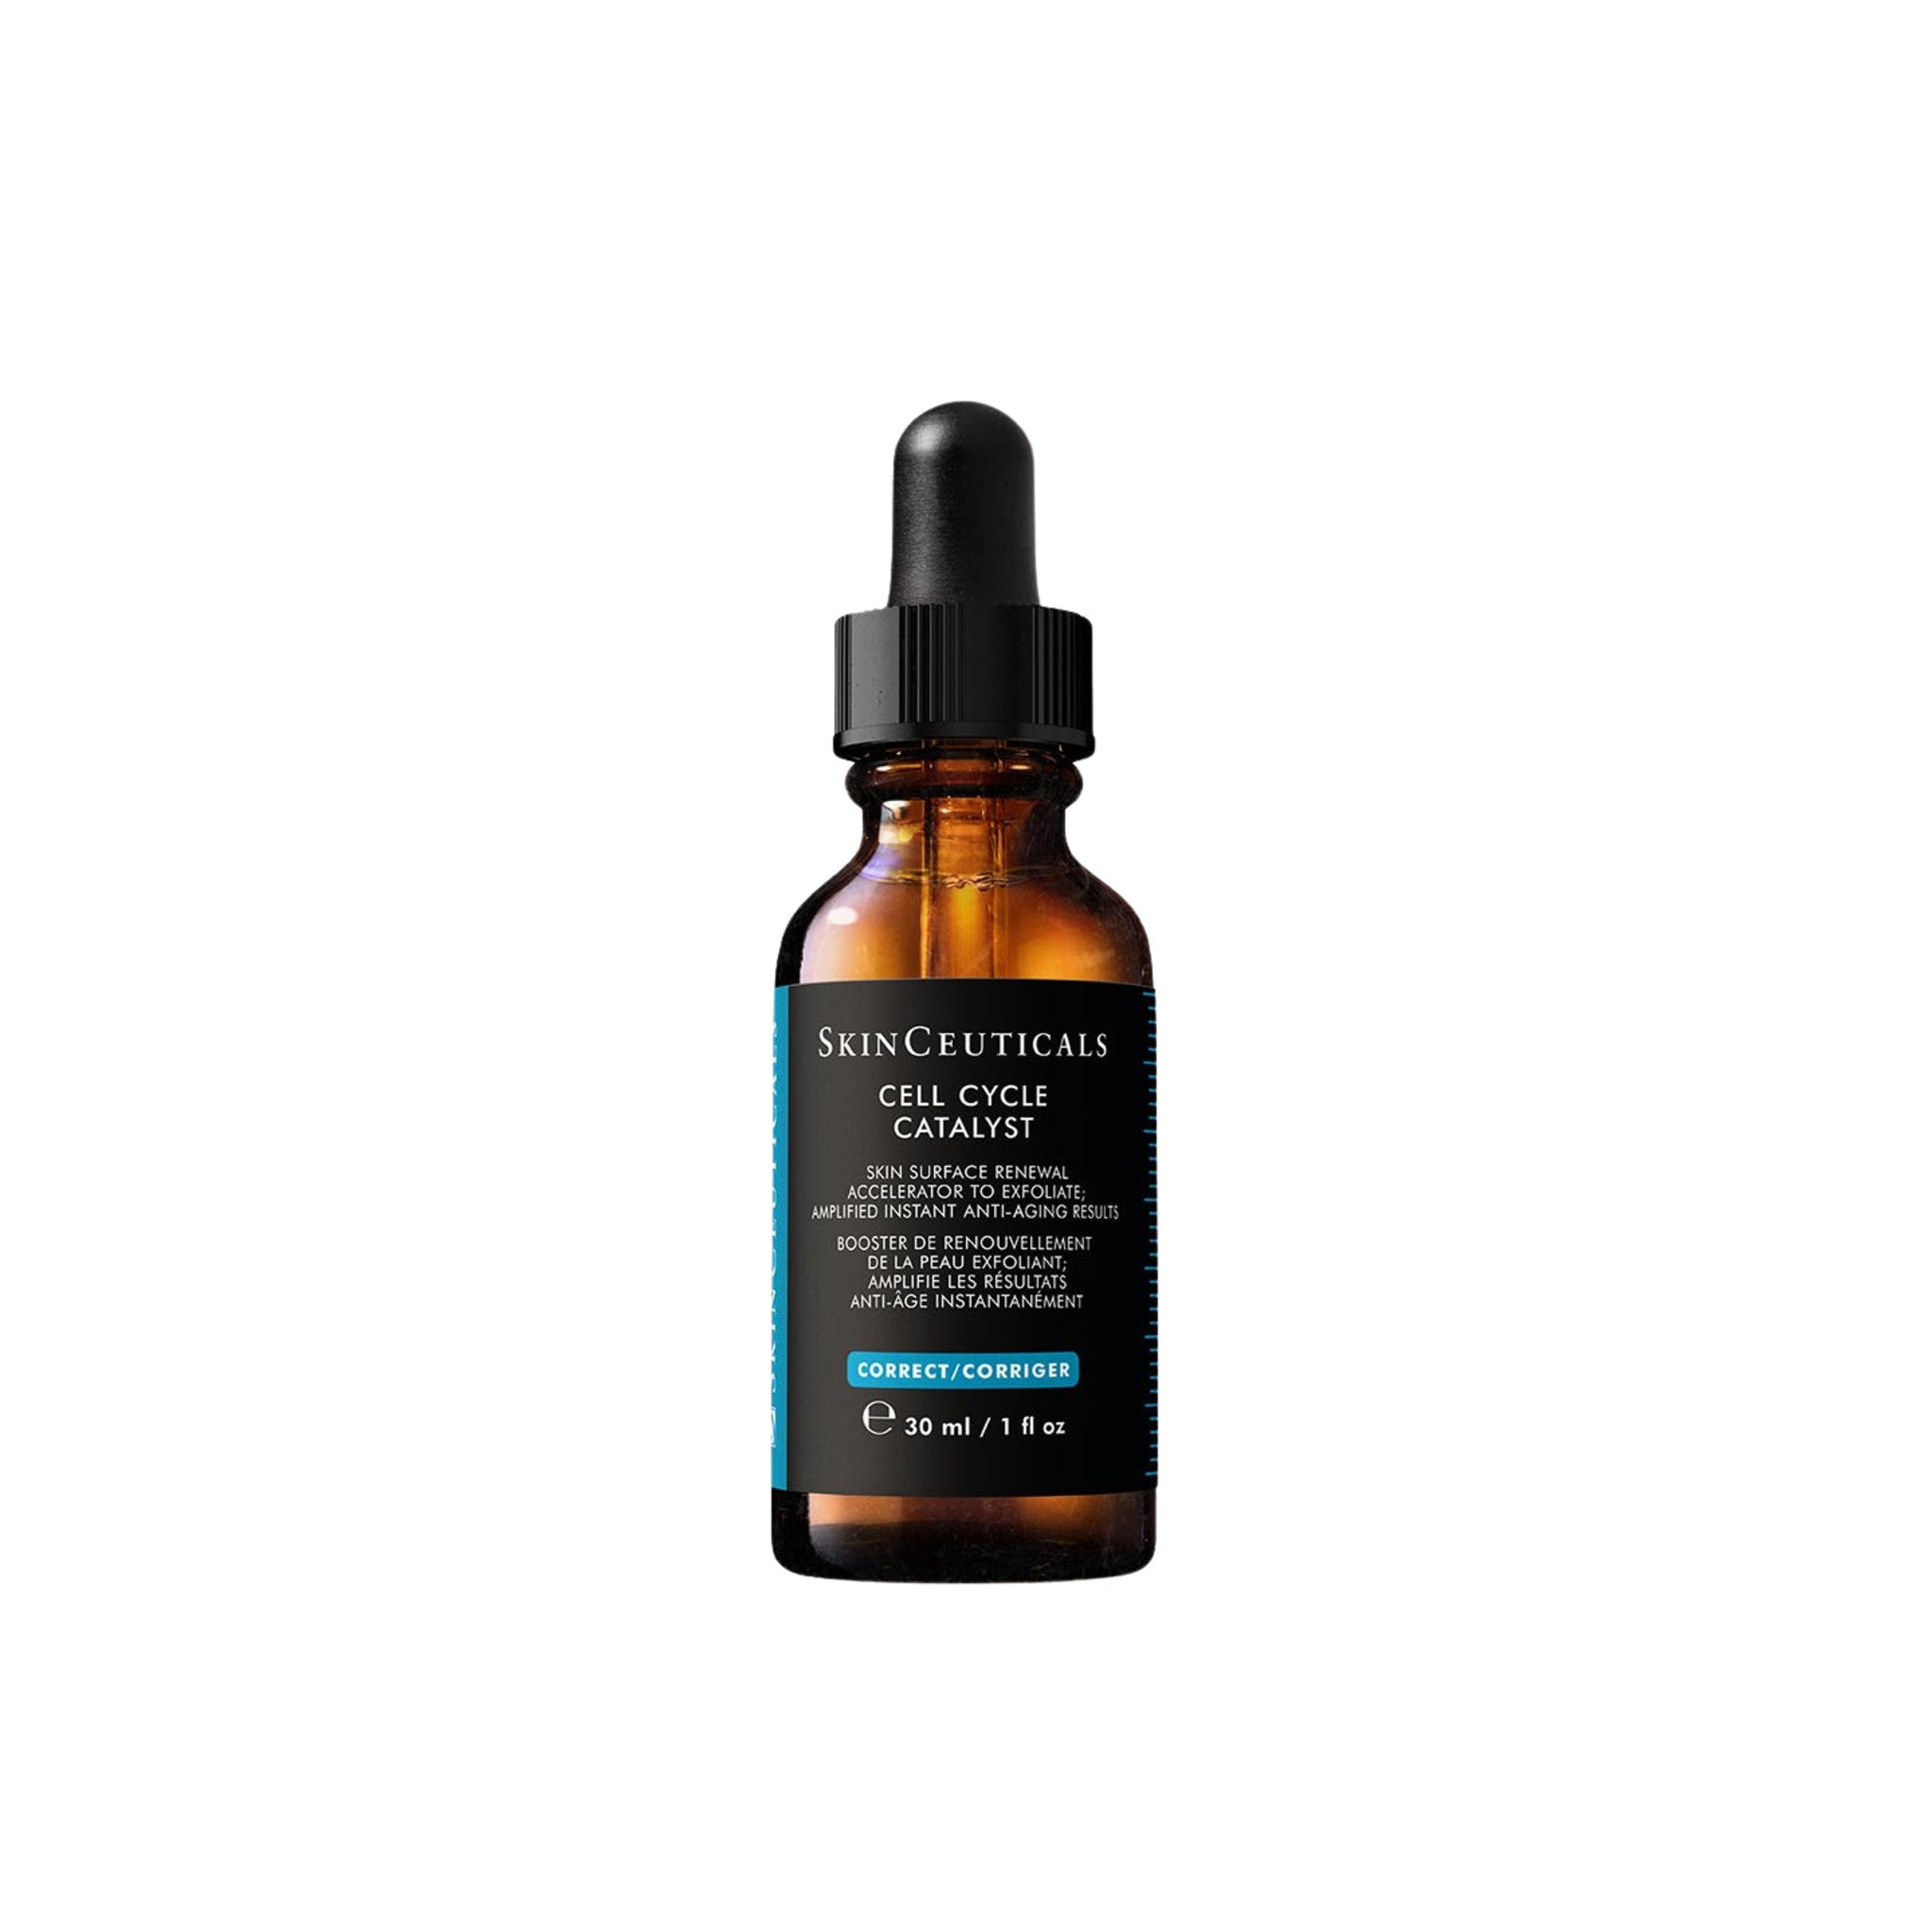 SkinCeuticals Cell Cycle Catalyst main image.